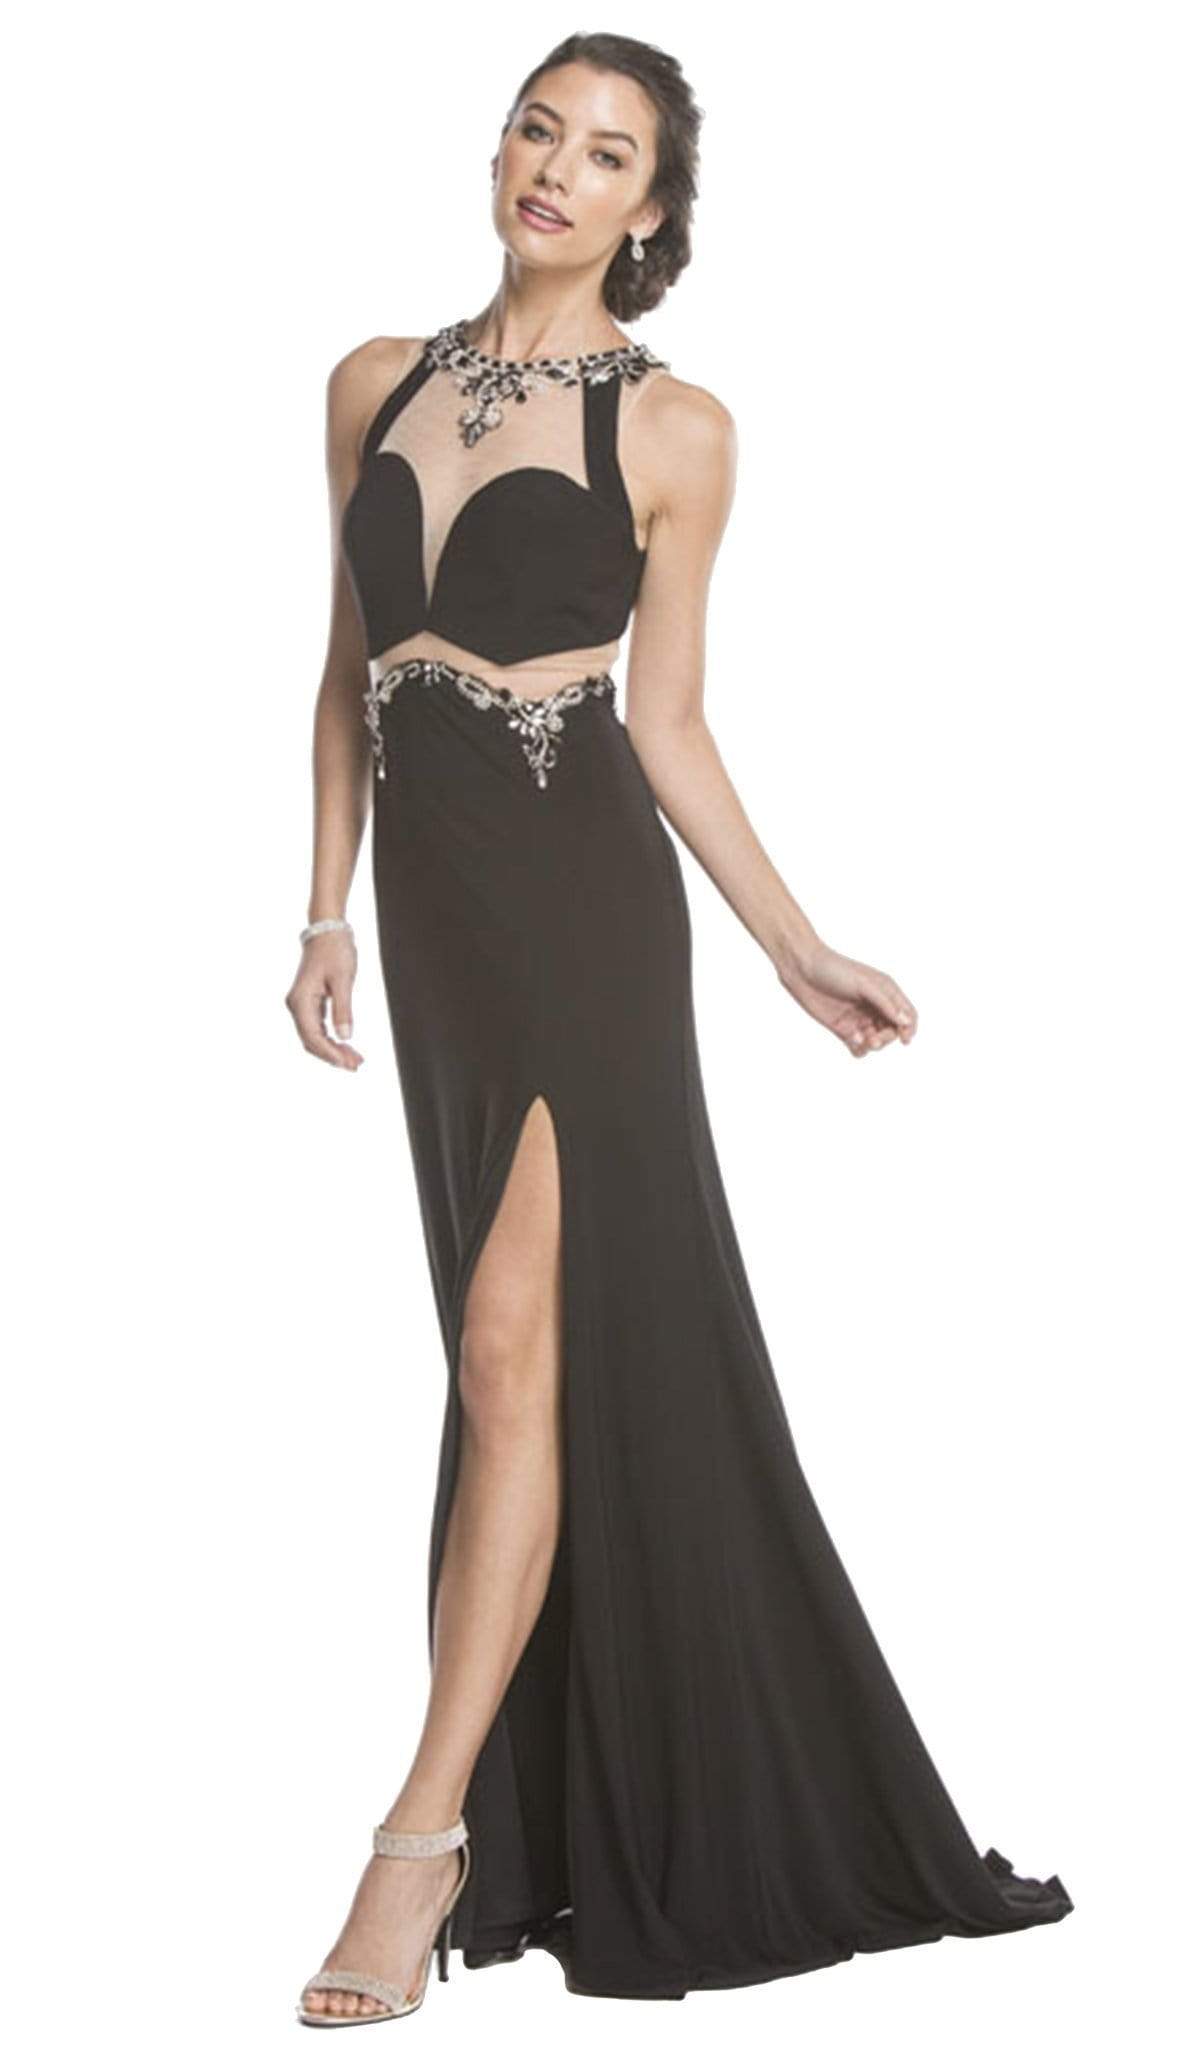 Image of Aspeed Design - Bedazzled Halter Sheath Affordable Prom Dress